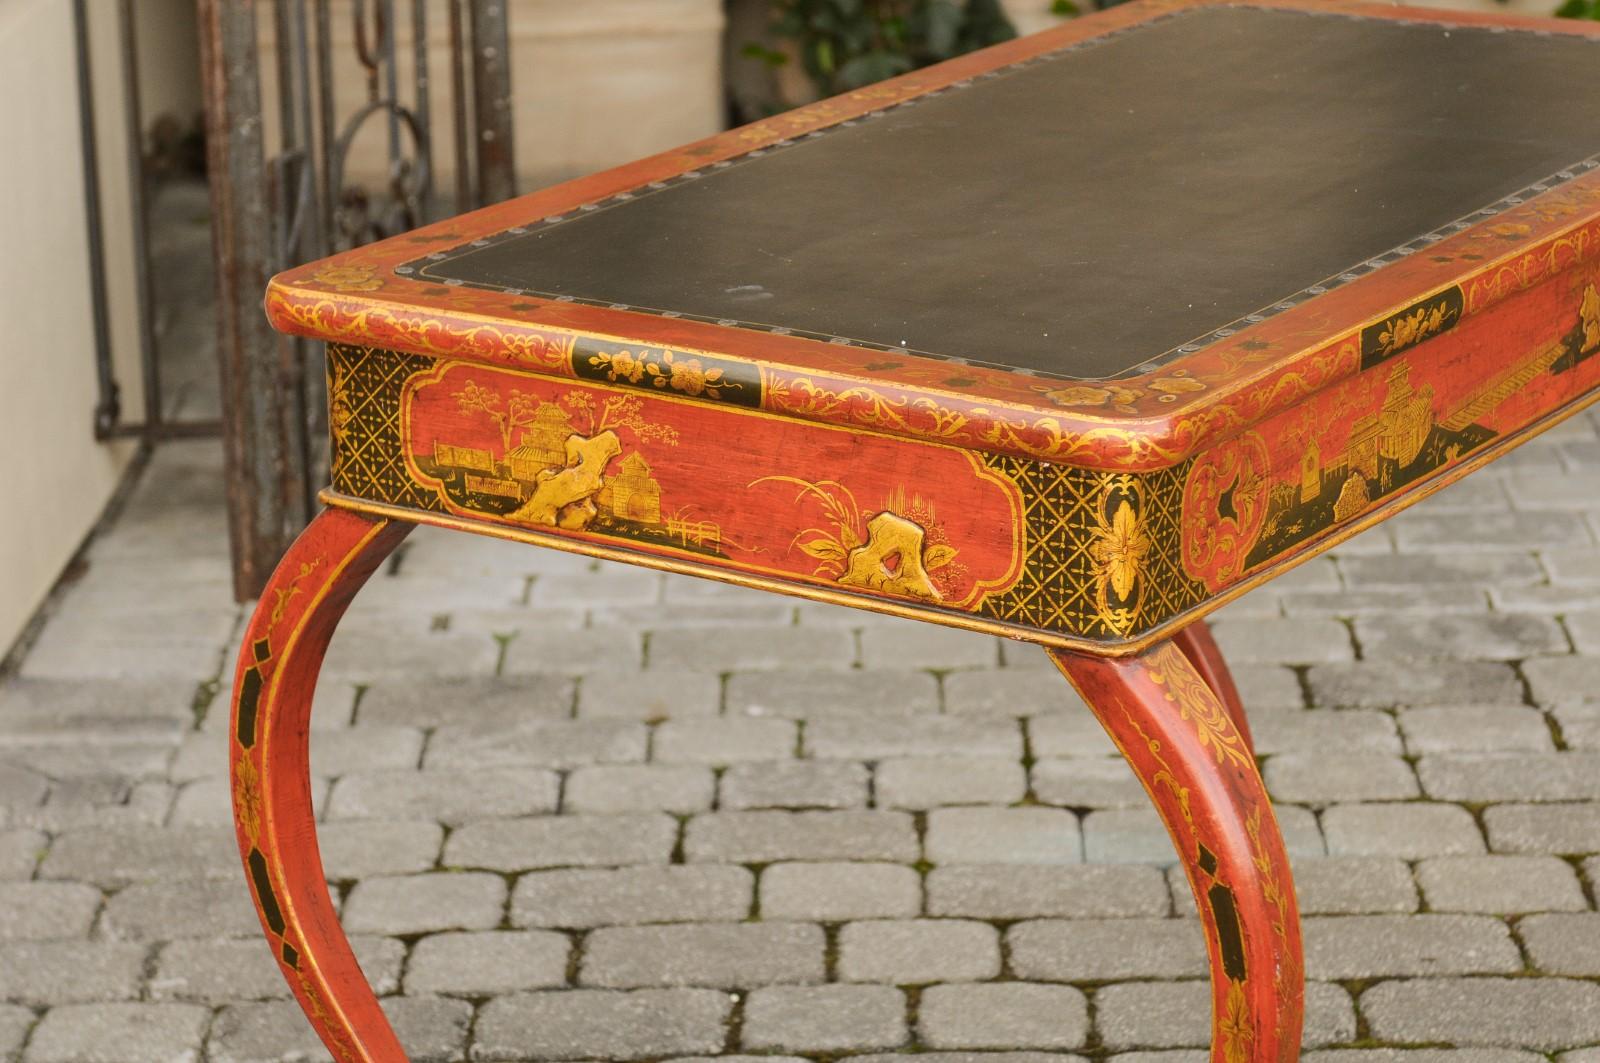 English Regency 1820s Table with Red Lacquered, Gold and Black Chinoiserie Decor For Sale 8